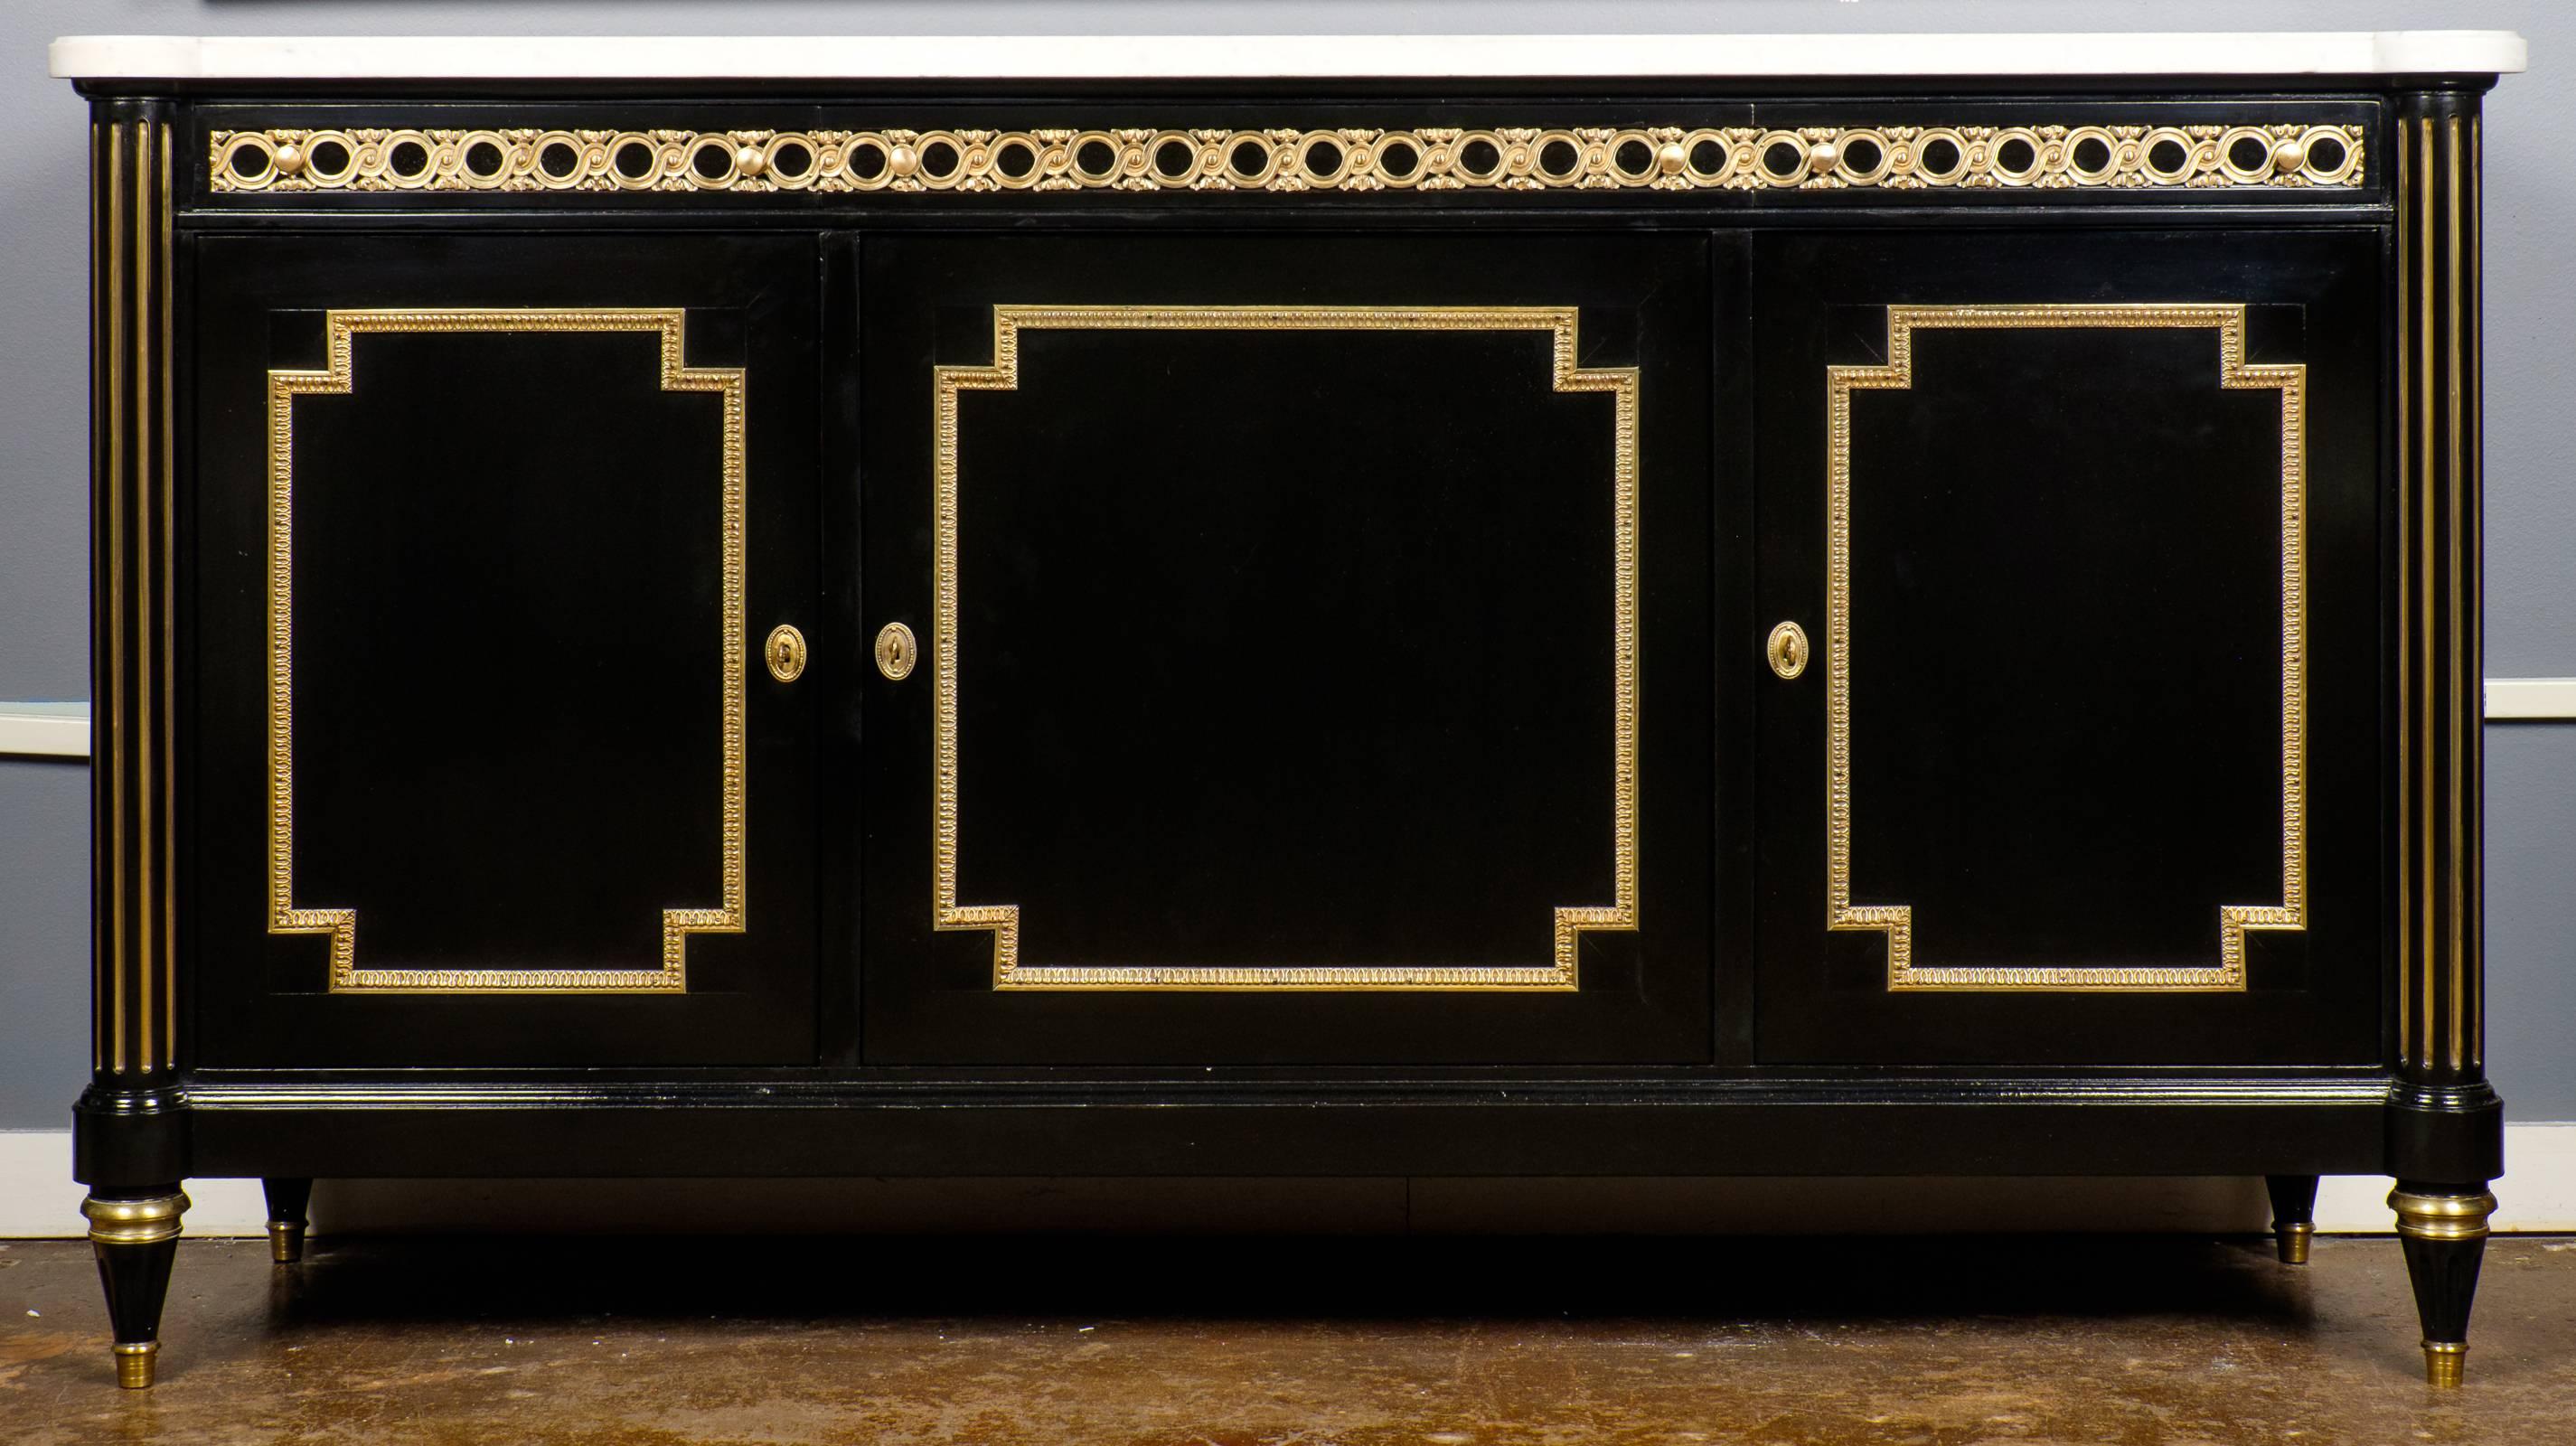 19th century Louis XVI style buffet in solid mahogany, ebonized with a lustrous French polish, original Carrara marble top. Three dovetailed drawers and three doors gleam with bronze décor. The polished mahogany interior is complete with adjustable